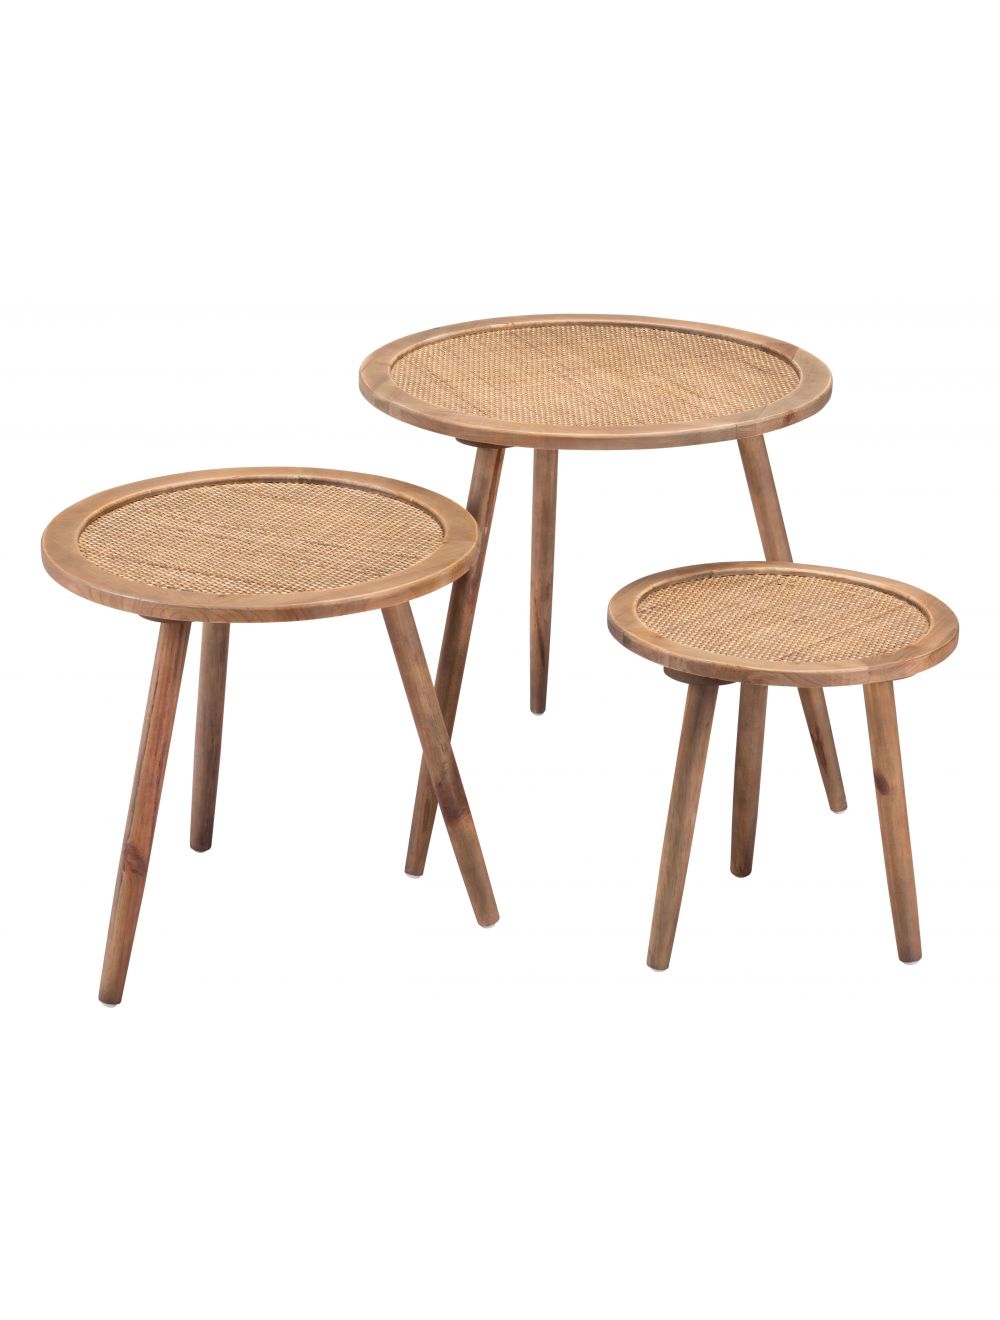 Paul Accent Tables Set of 3 Natural